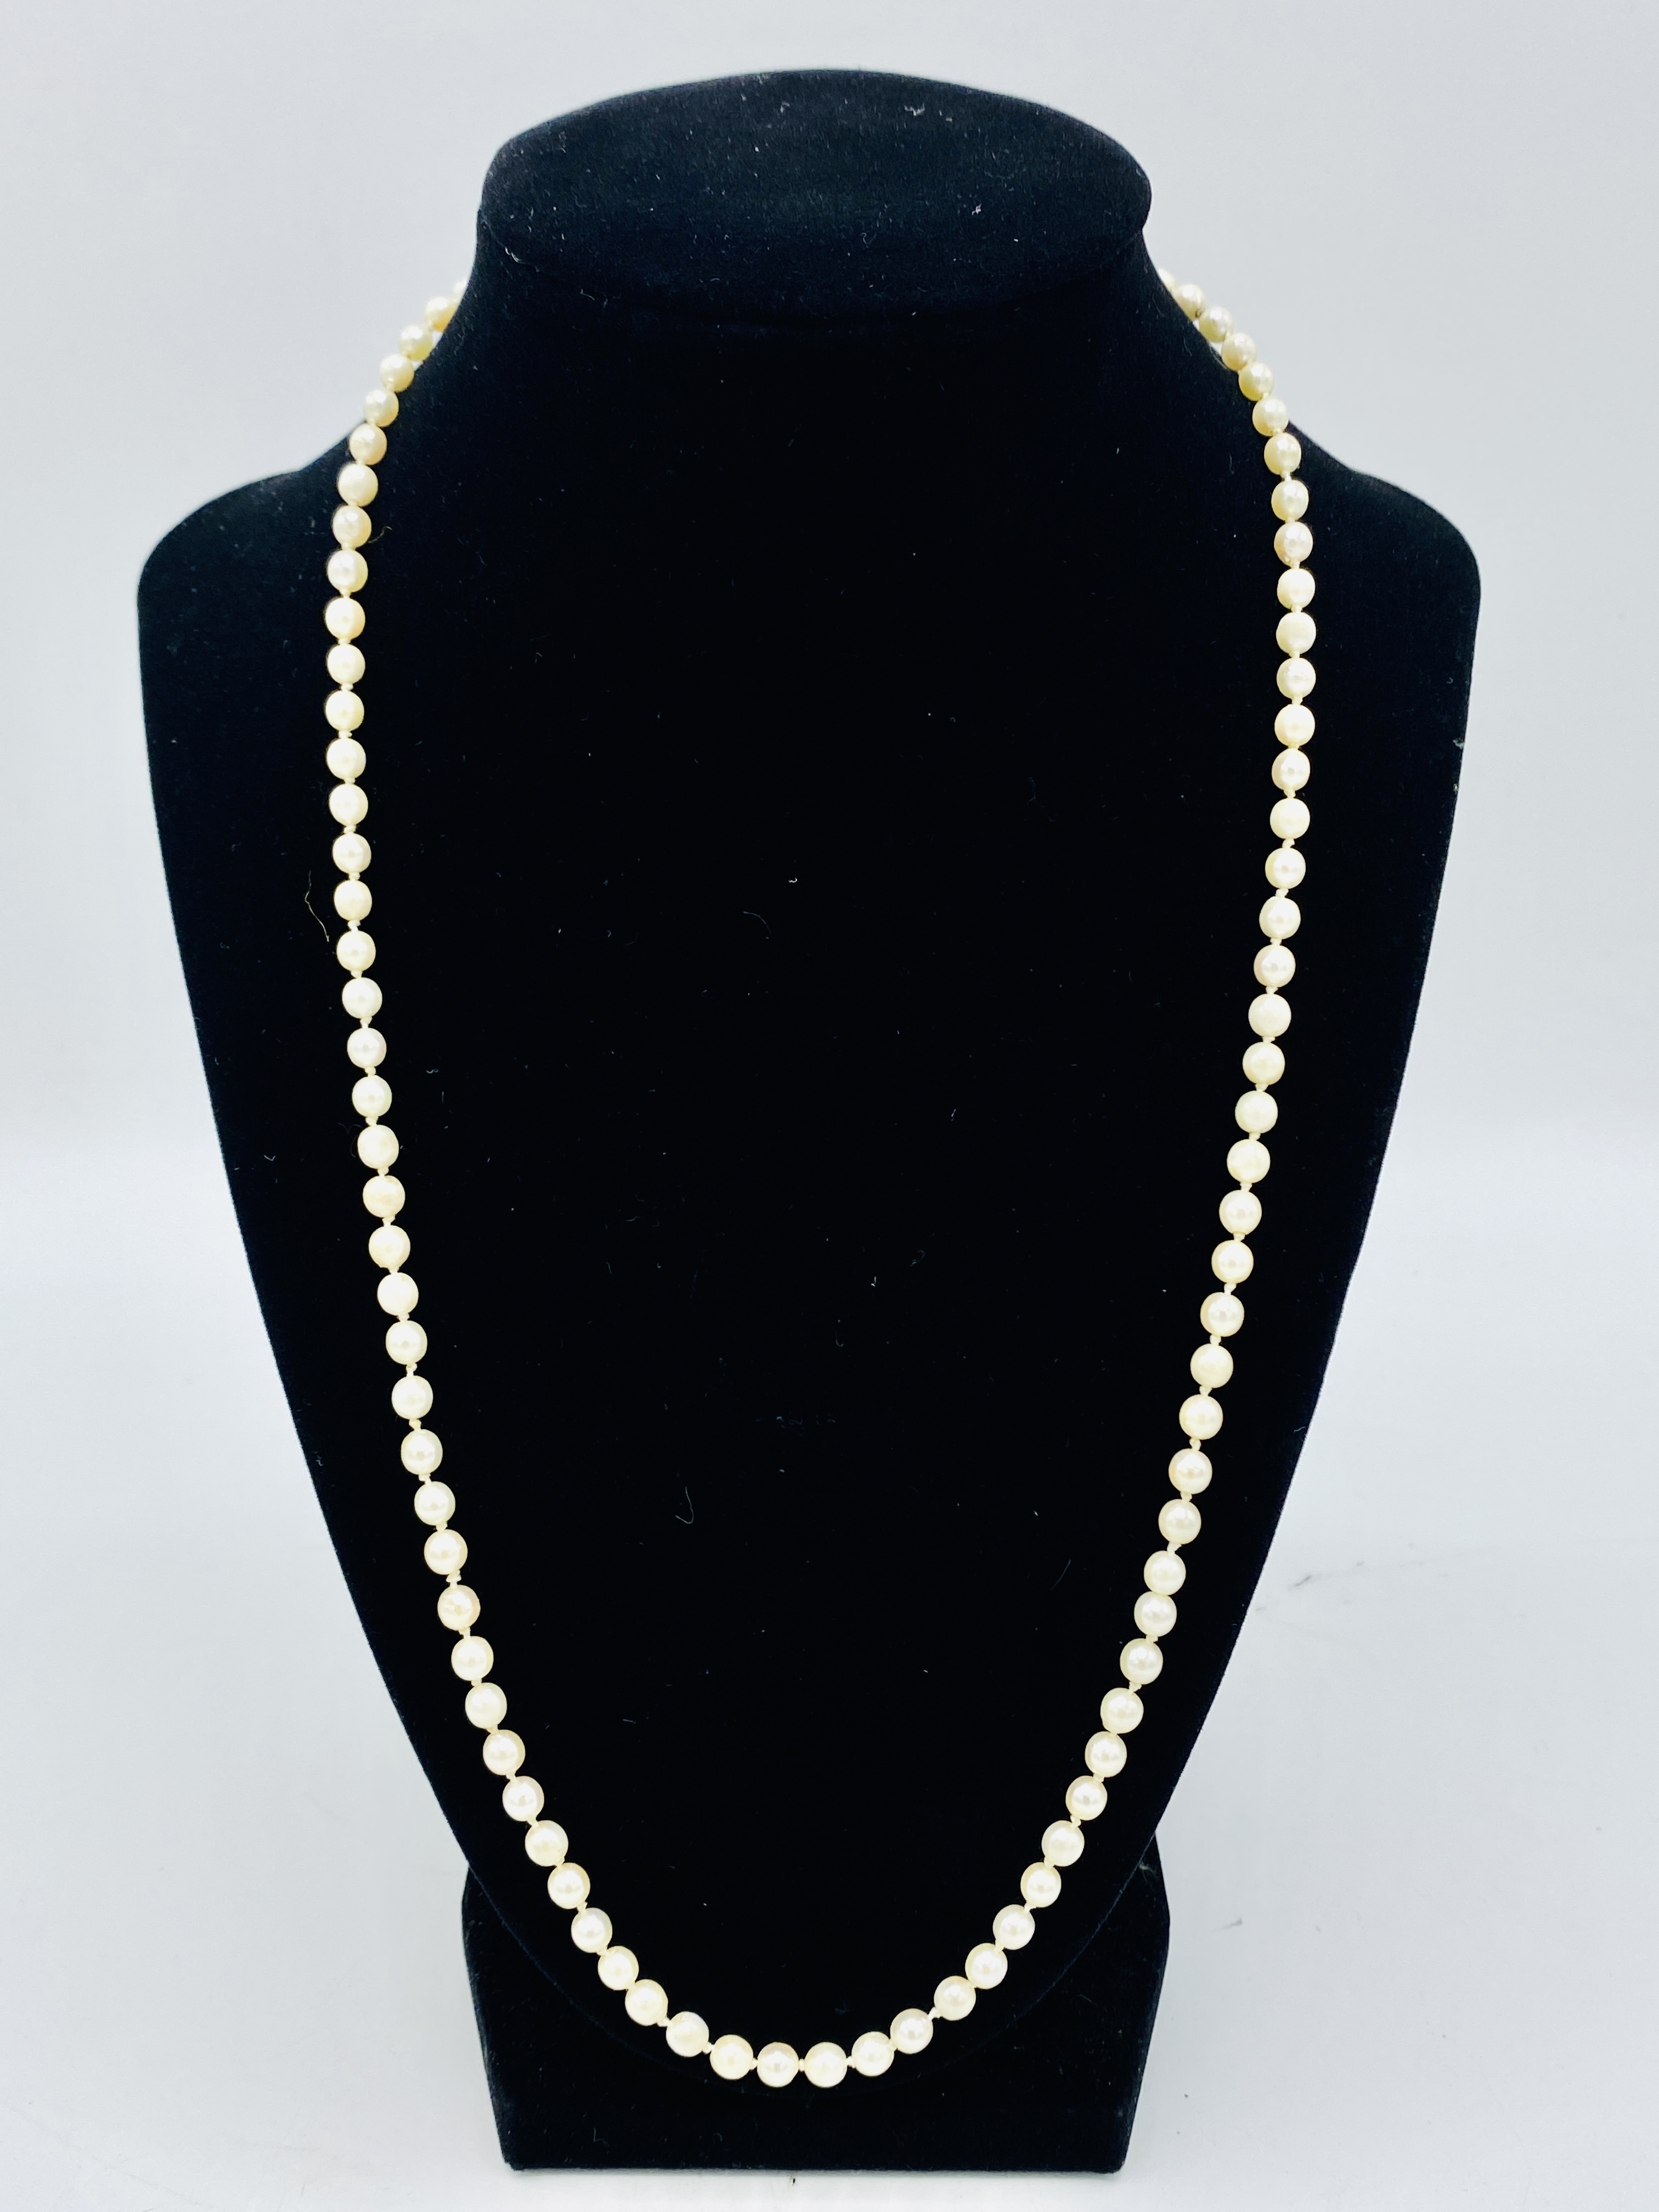 Two strings of pearls with gold clasps - Image 4 of 5